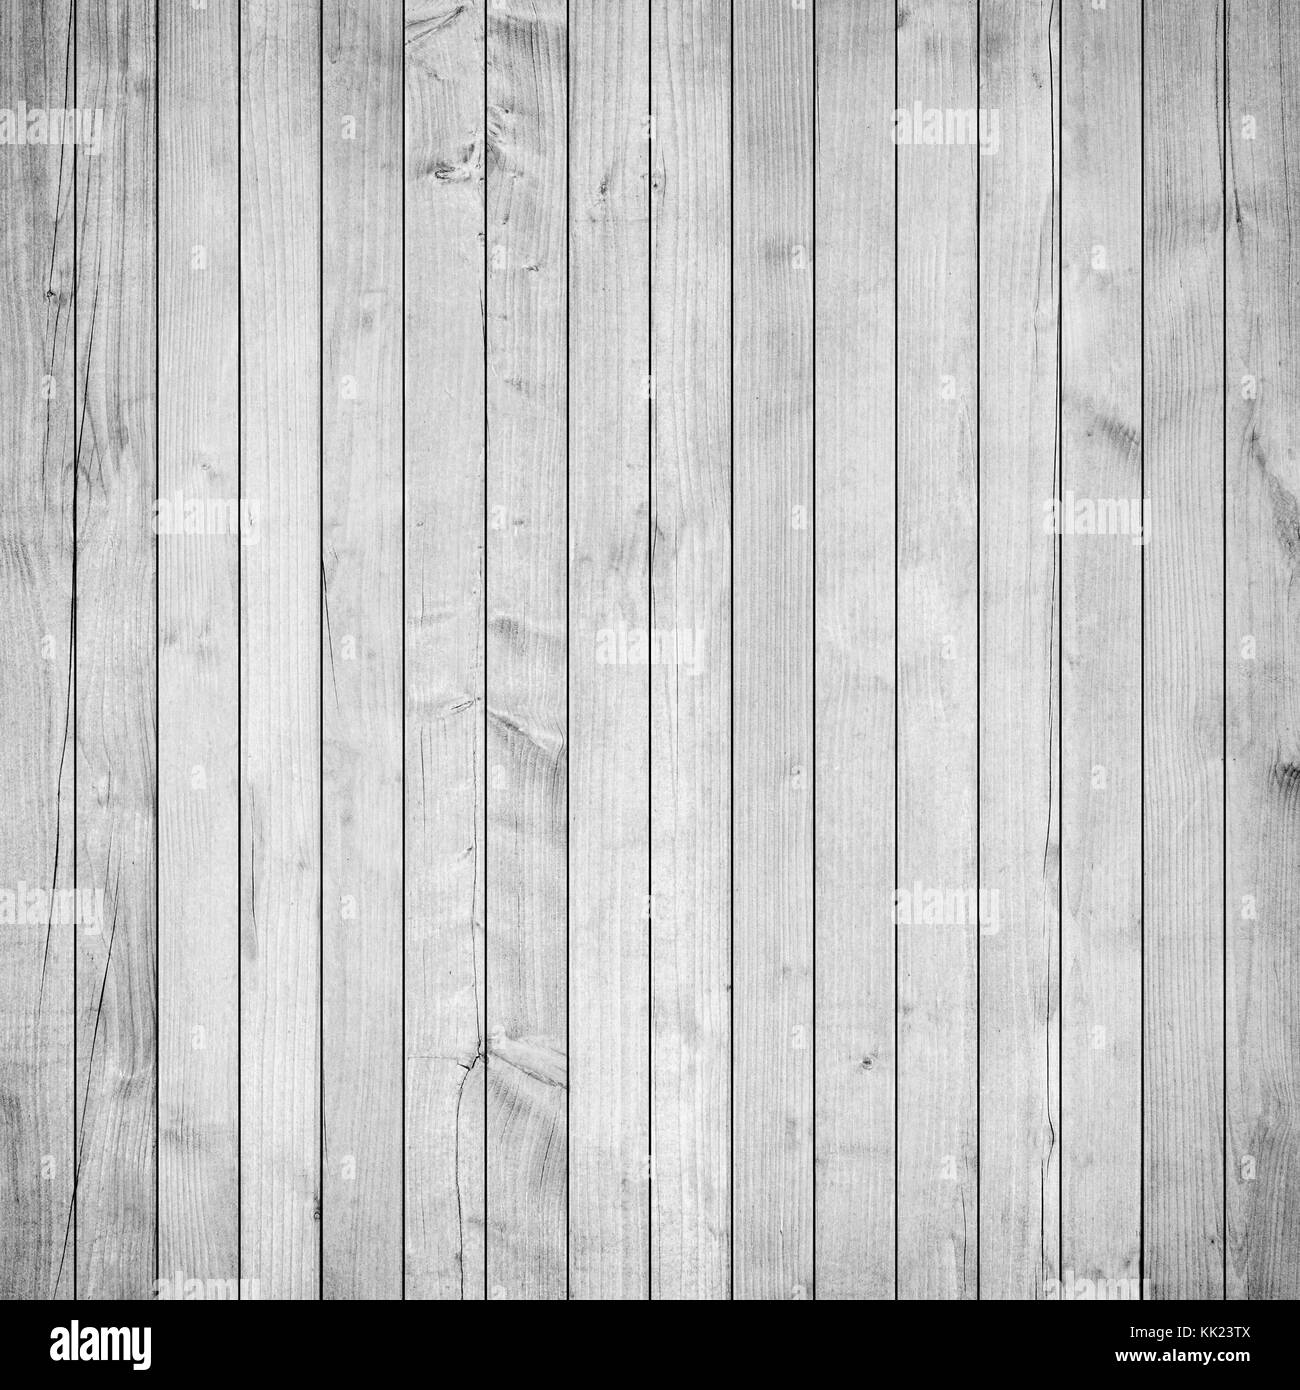 Old white, gray wooden parquet, table, or floor surface. Wooden texture with vertical planks Stock Photo